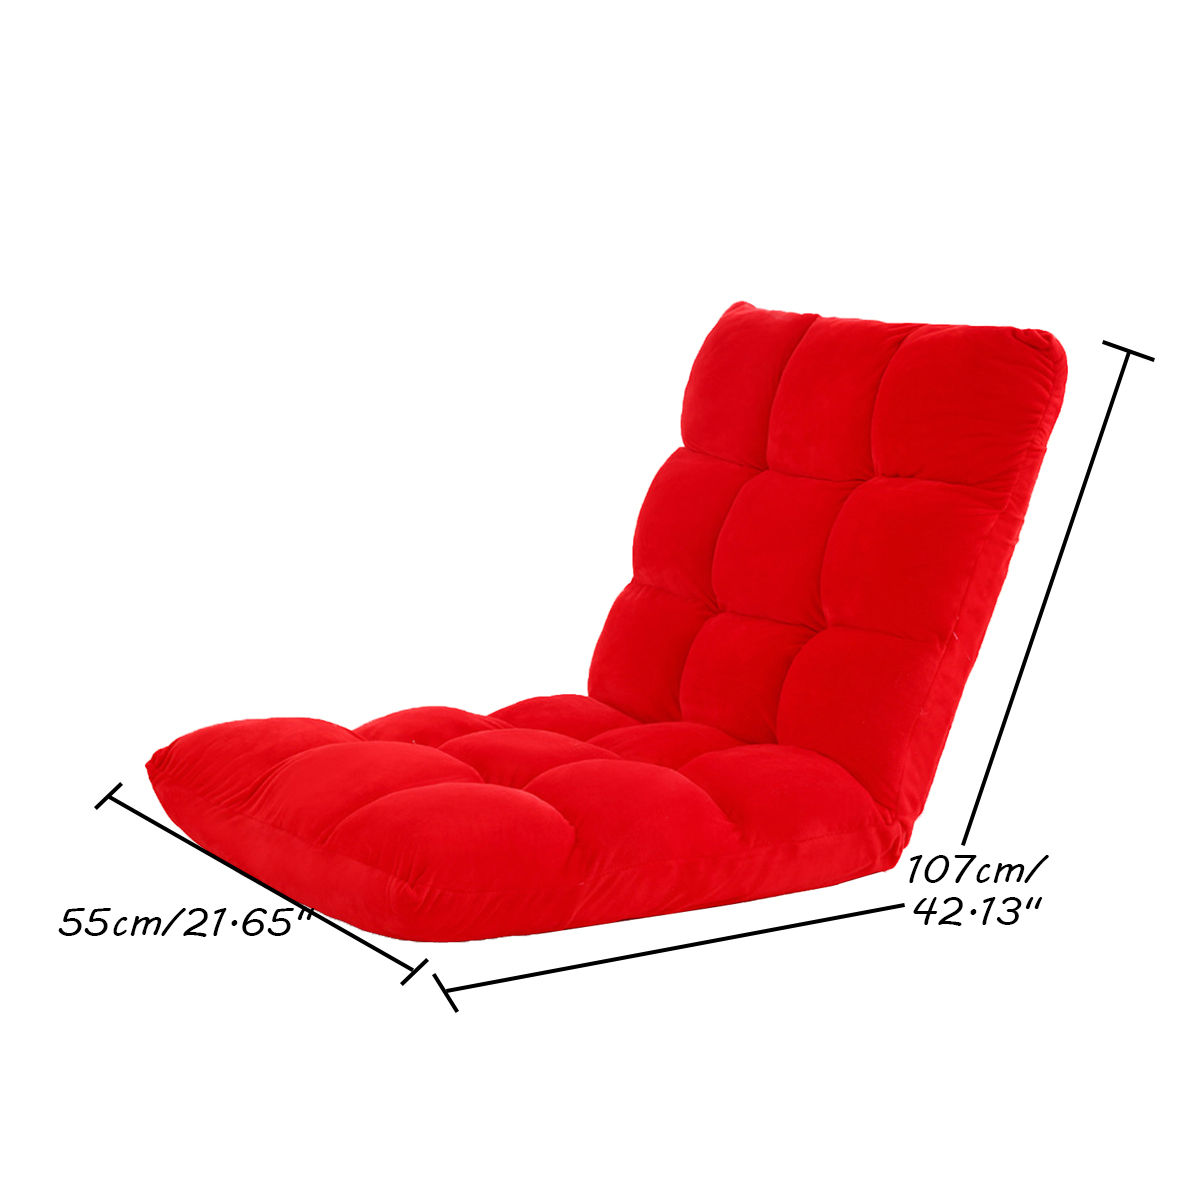 Adjustable Lazy Sofa Cushioned Floor Lounge Chair Living Room Leisure Chaise Chair 14